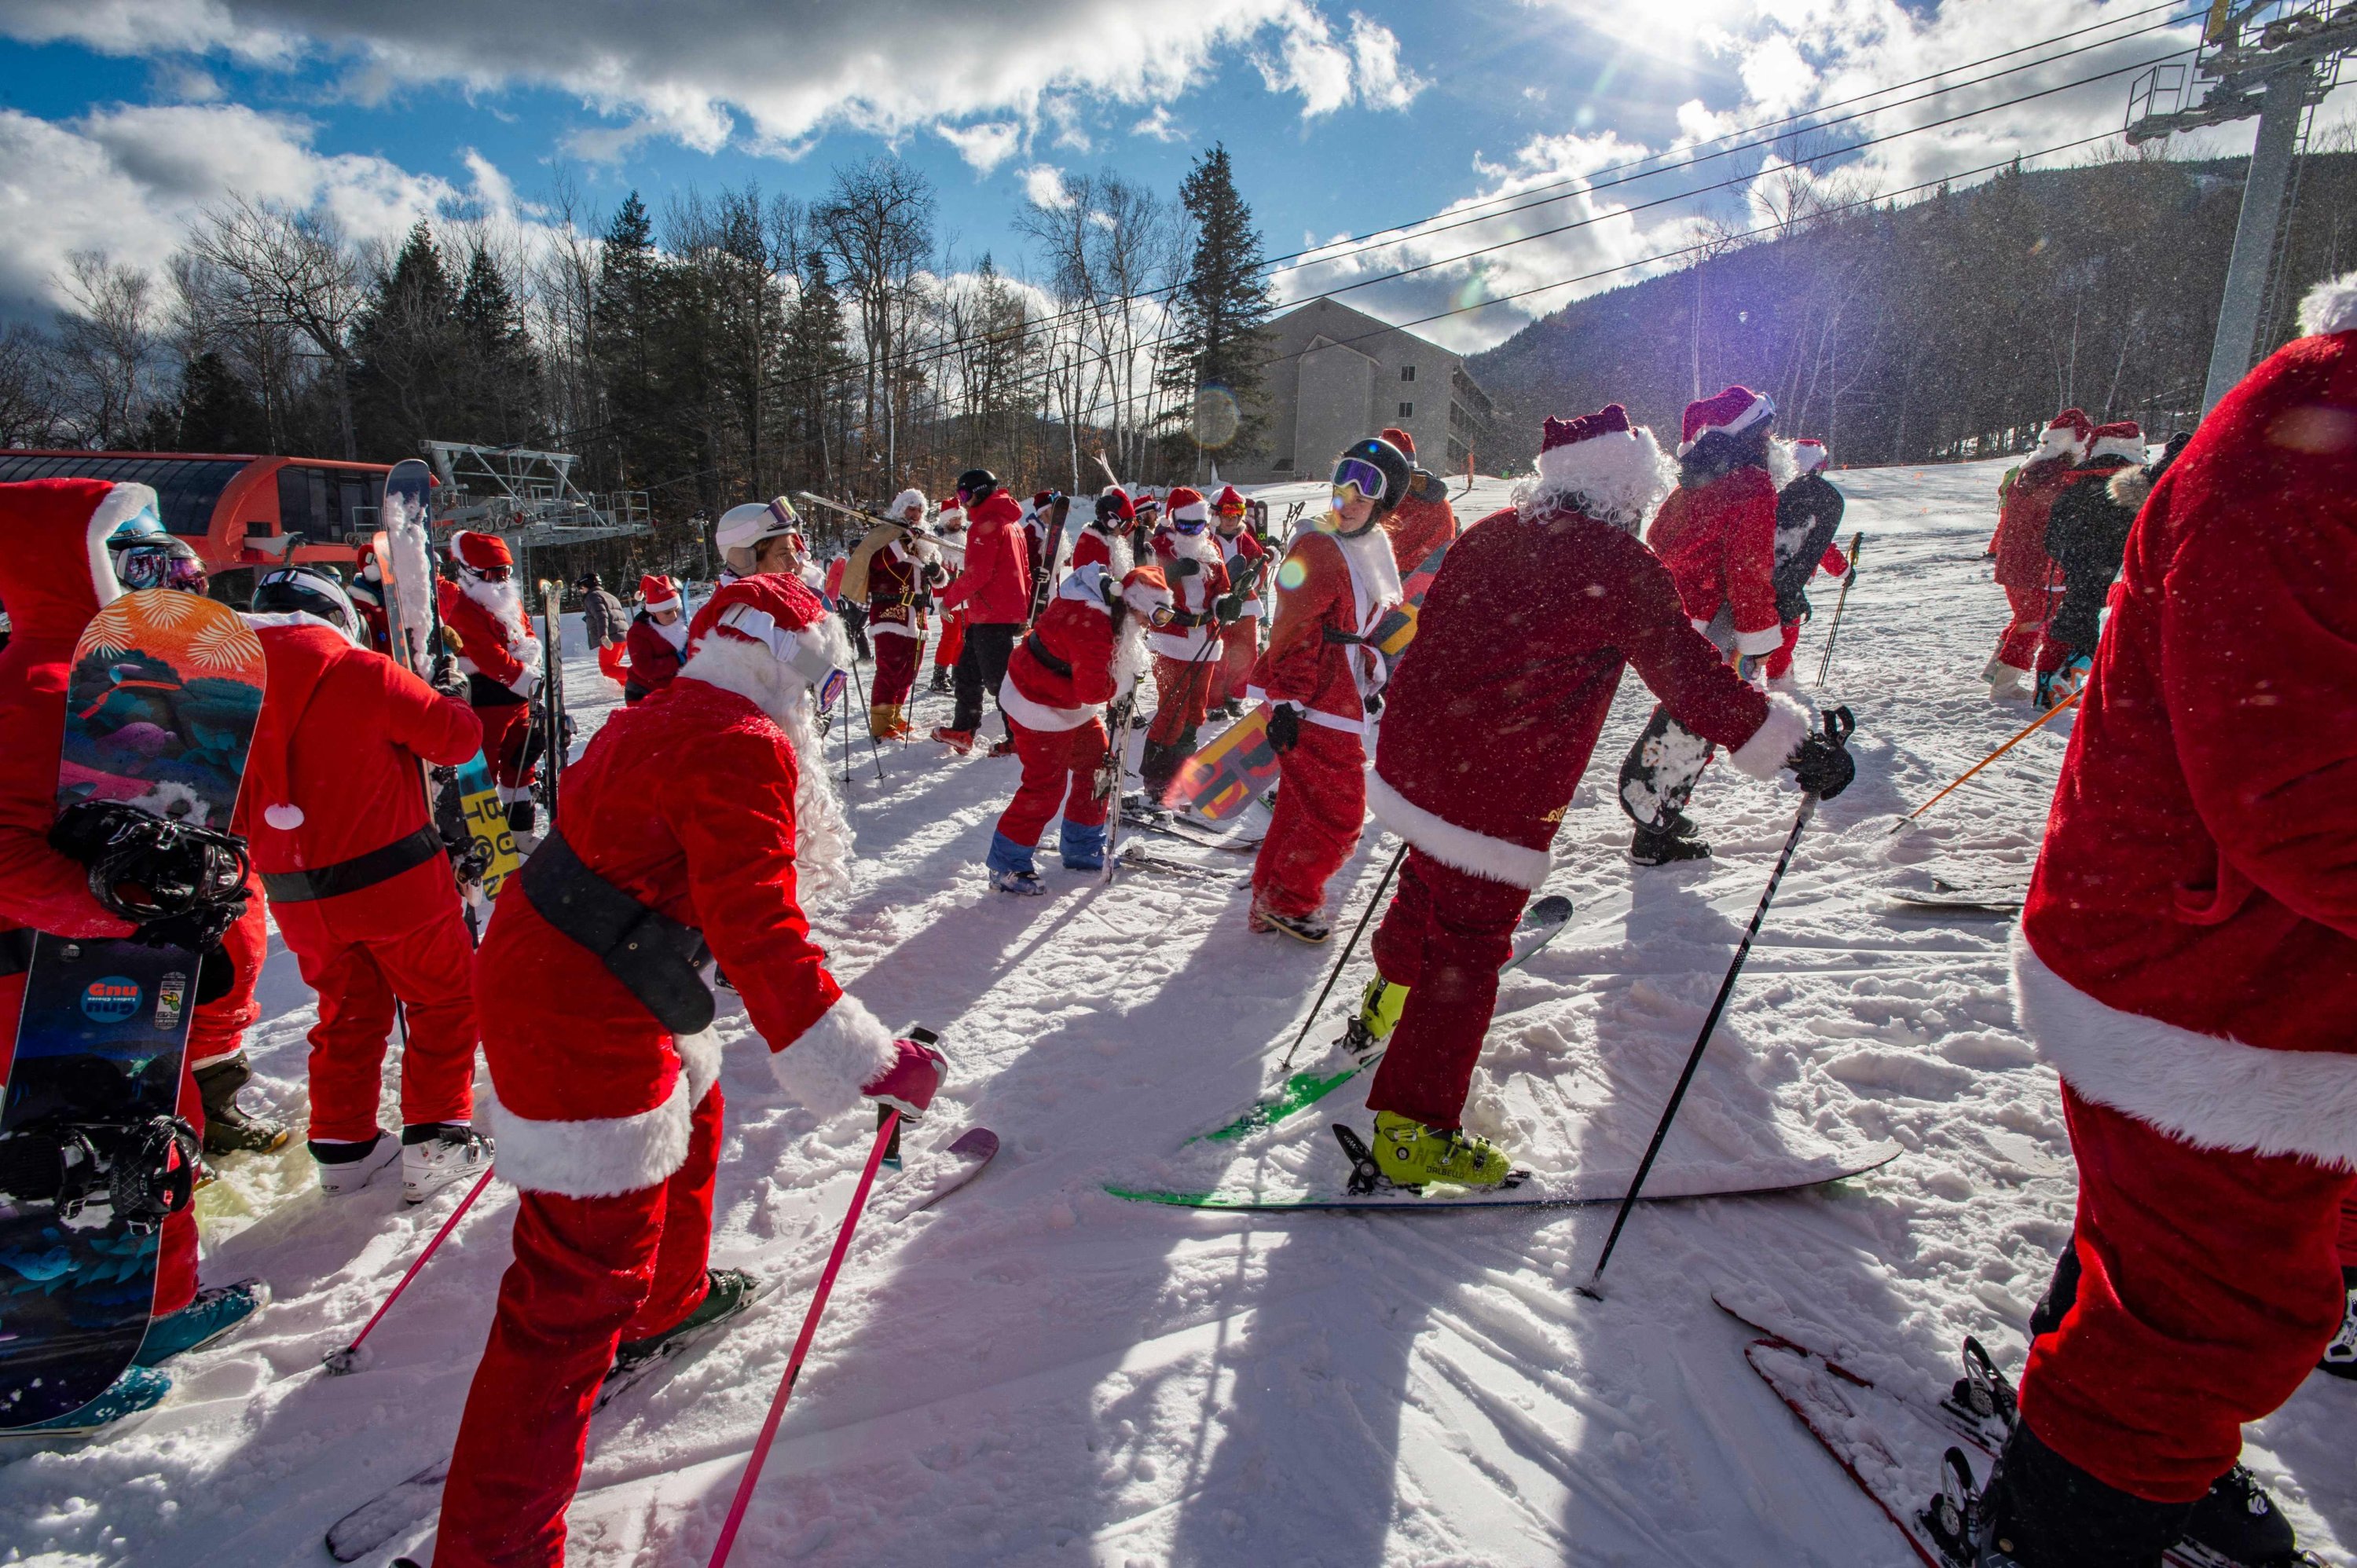 Skiers and snowboarders take part in the annual Santa Ski Run on Santa Sunday at Sunday River in Newry, Maine, U.S., Dec. 5, 2021. (AFP Photo)